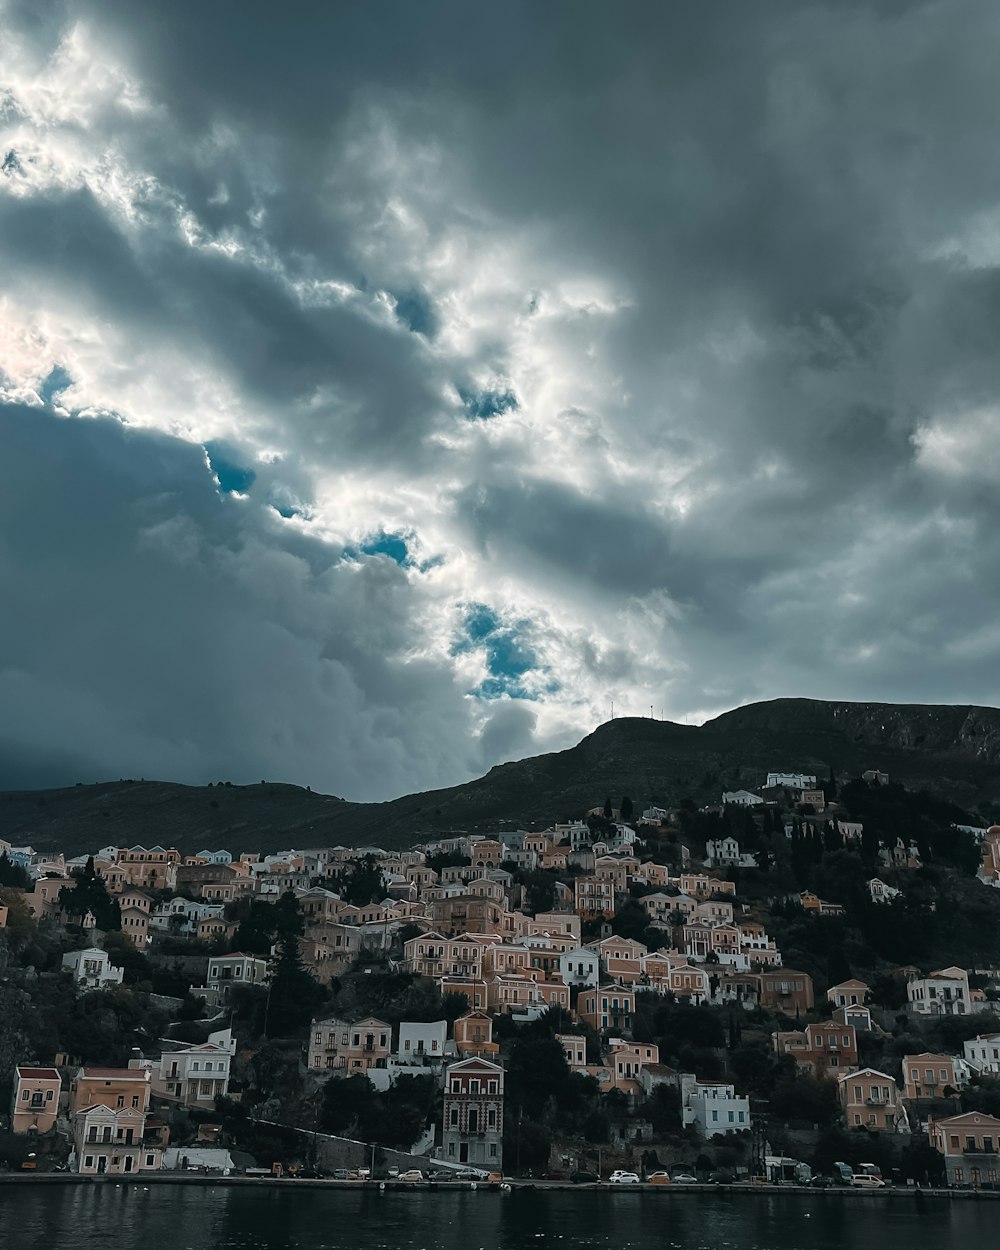 a cloudy sky over a small town on a hill